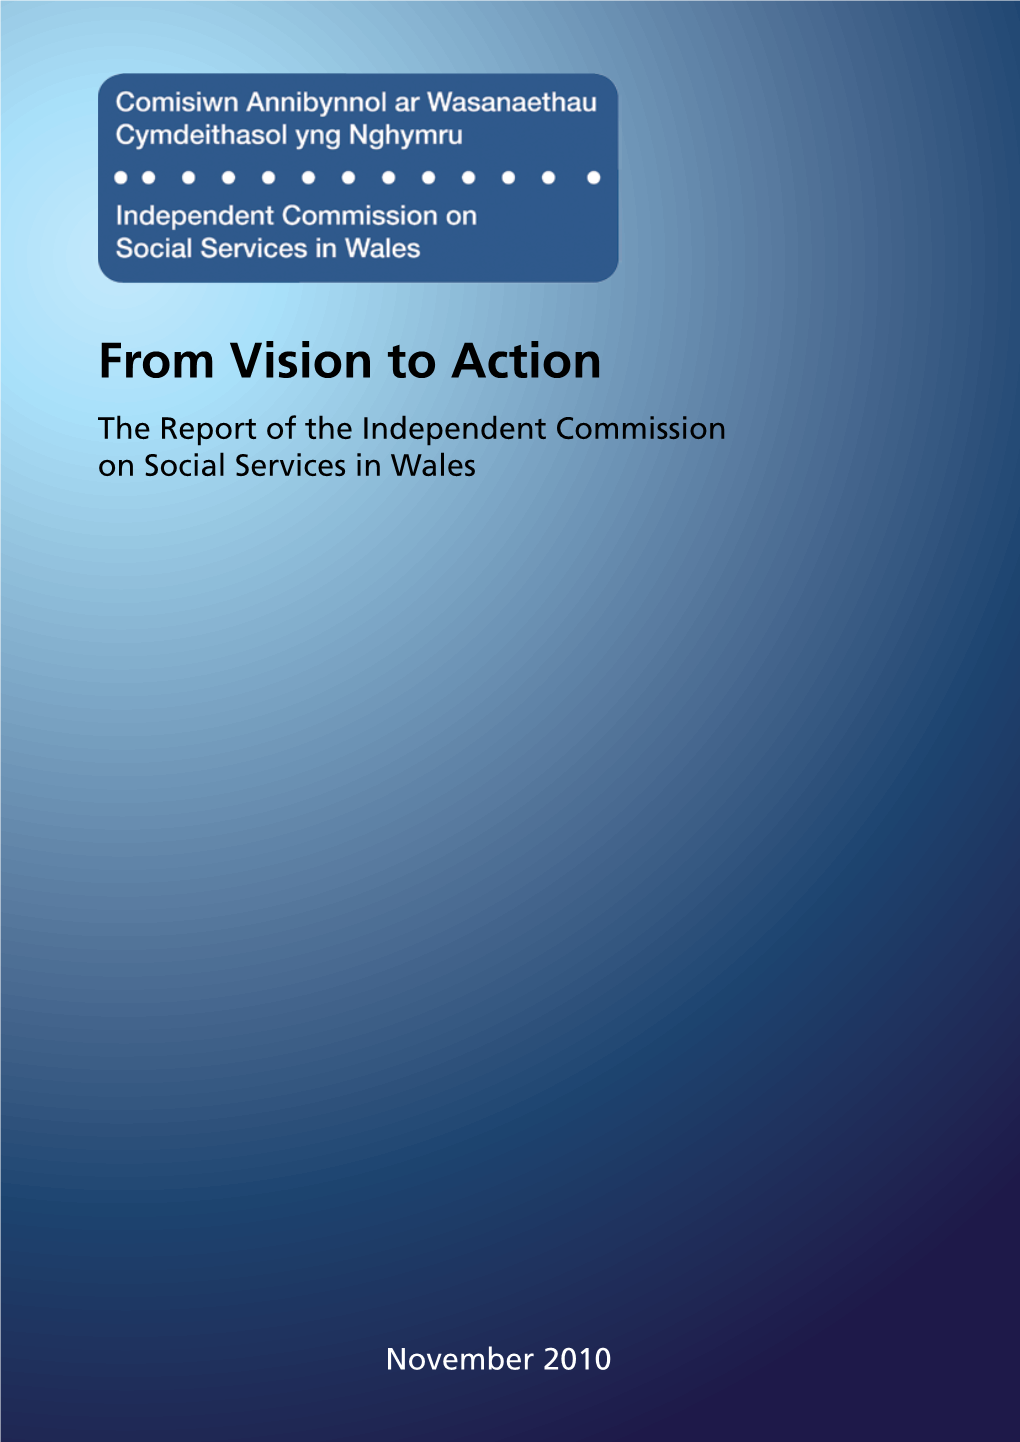 From Vision to Action: Report of the Independent